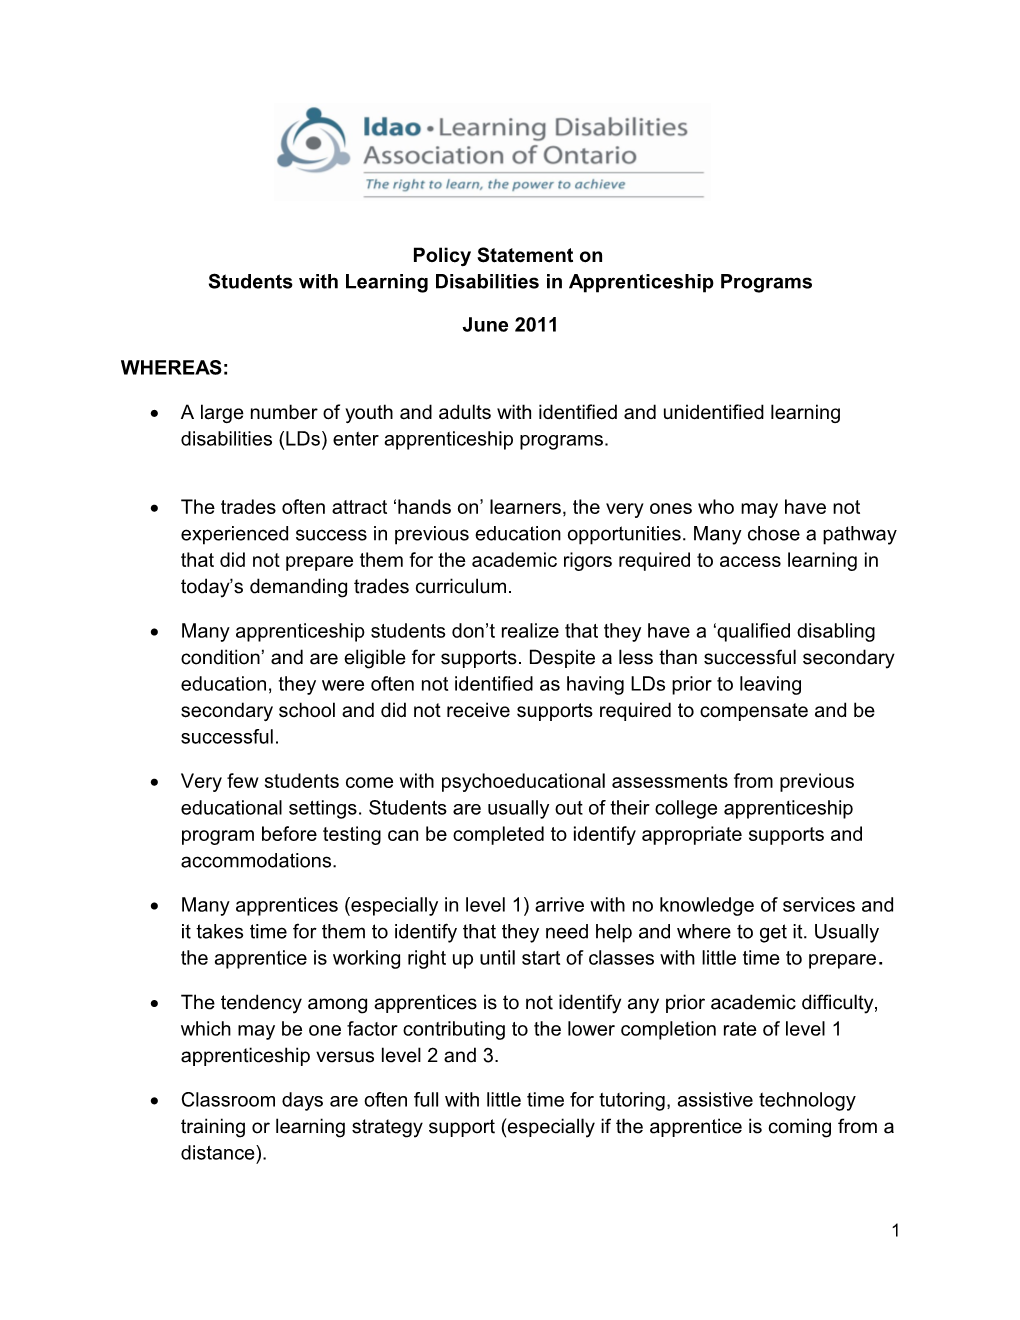 Policy Statement on Students with Learning Disabilities in Apprenticeship Programs